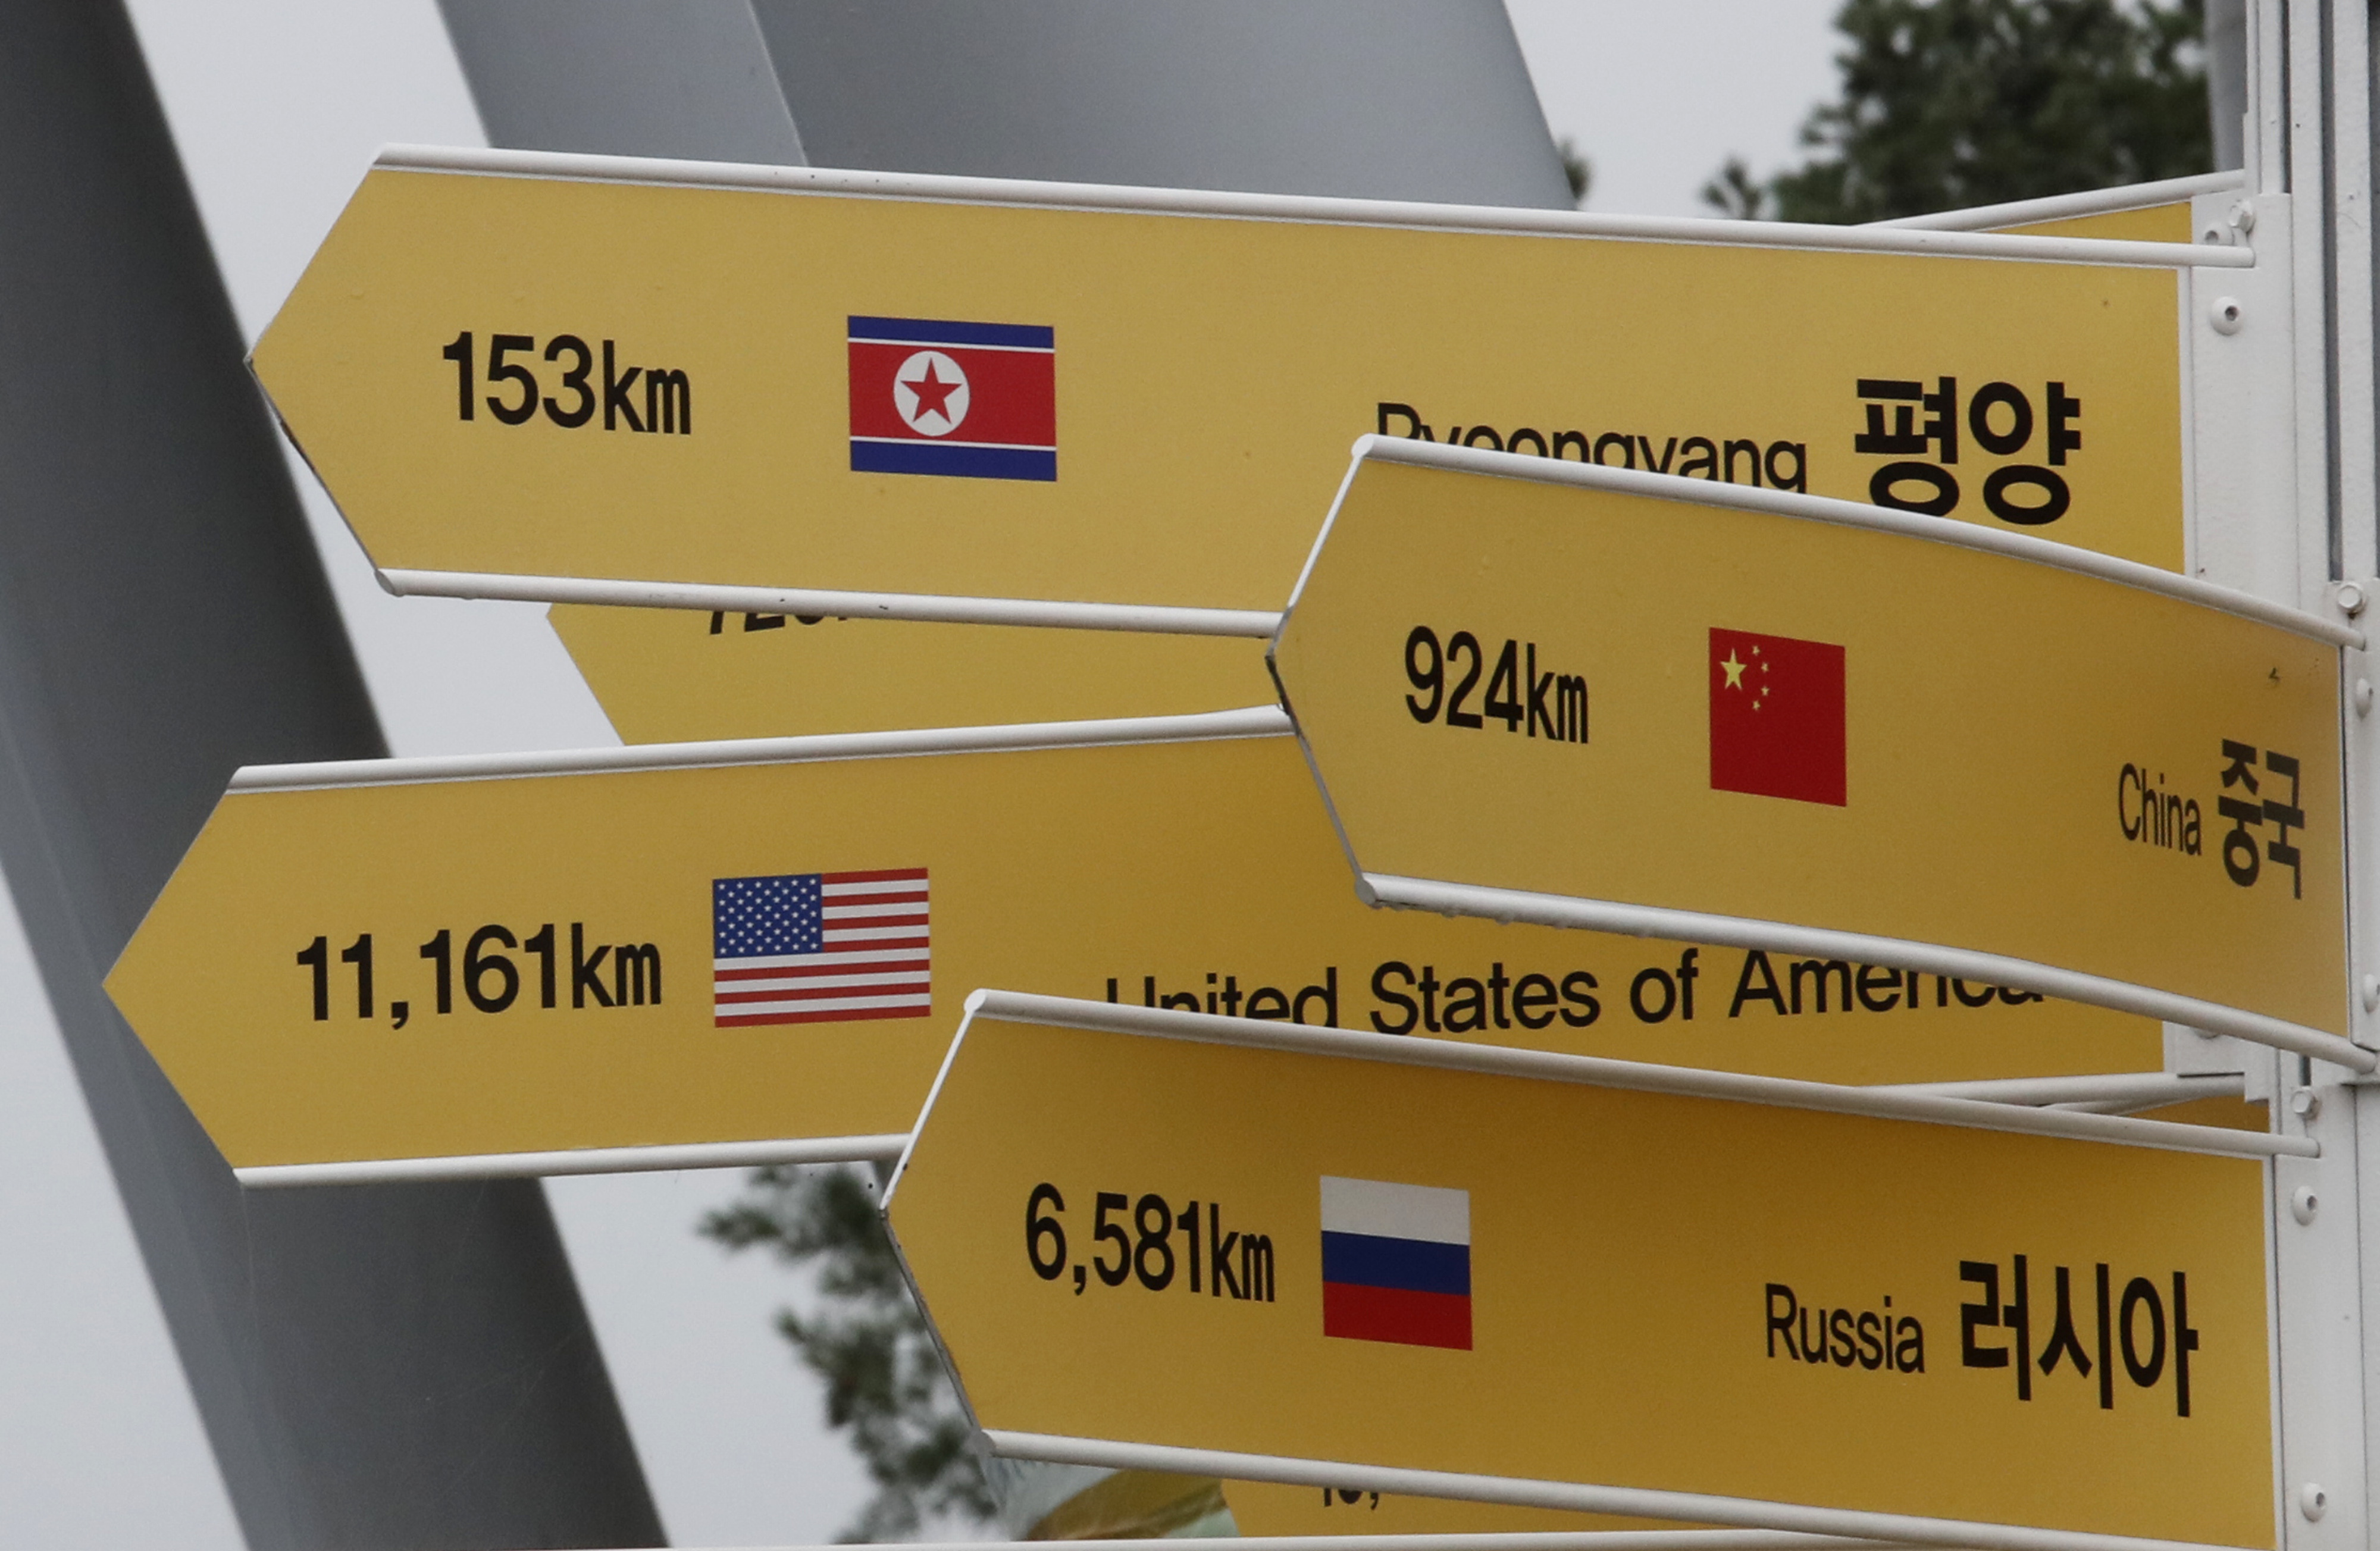 A destination sign to North Korea's capital Pyongyang, top, is seen at the Imjingak Pavilion in Paju, South Korea, near the border with North Korea, Thursday, July 25, 2019. North Korea fired two short-range missiles into the sea Thursday, South Korea's military said, the first weapons launches in more than two months and an apparent pressuring tactic aimed at Washington as North Korean and U.S. officials struggle to restart nuclear negotiations. (AP Photo/Ahn Young-joon)